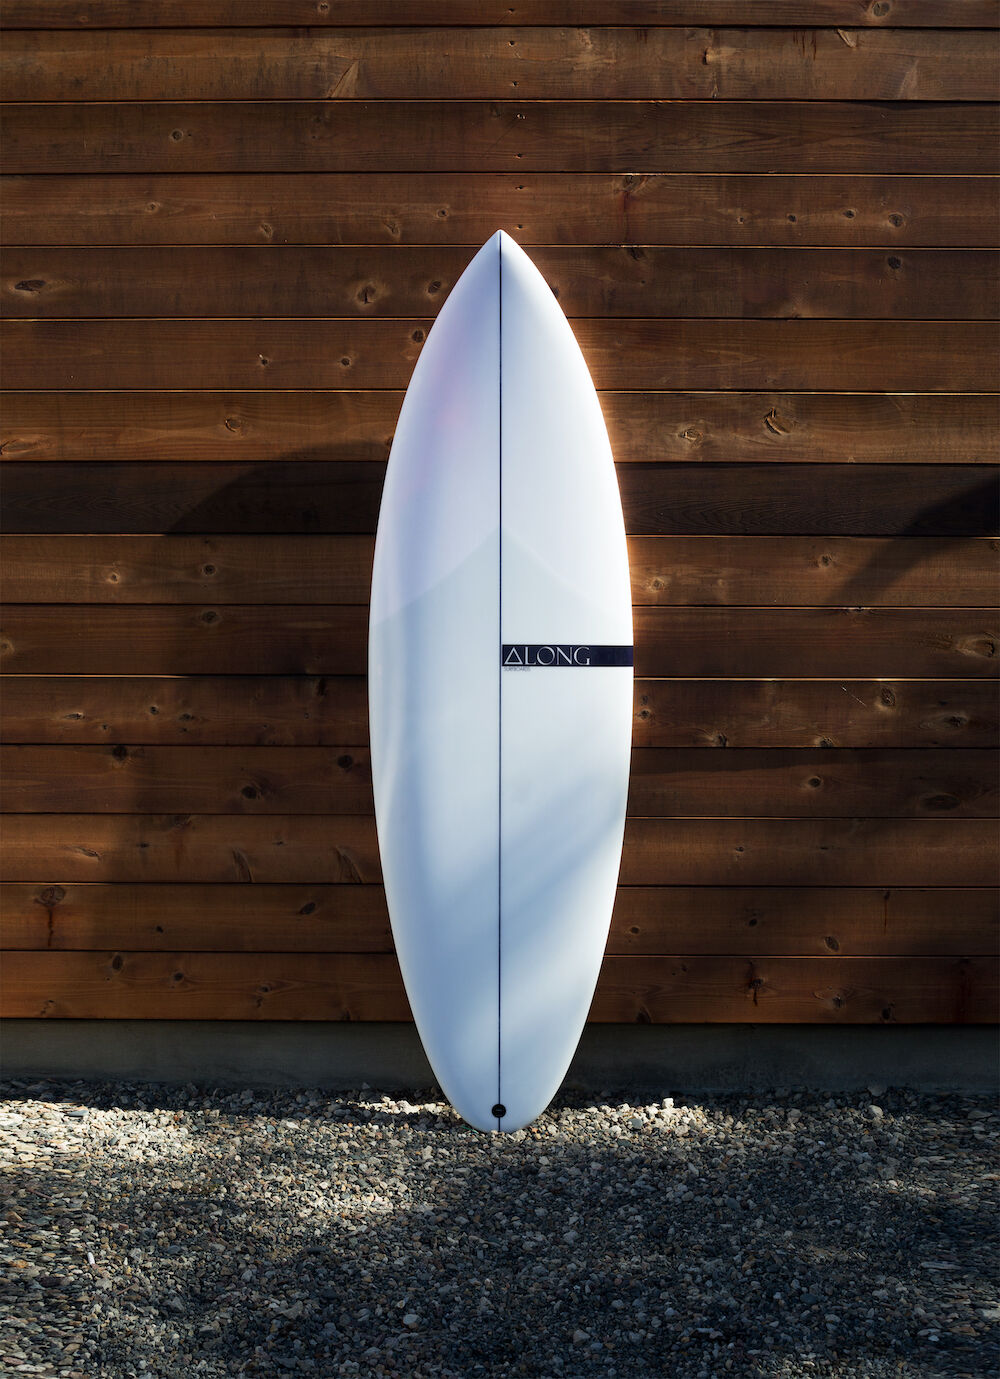 North County - Along Surfboards